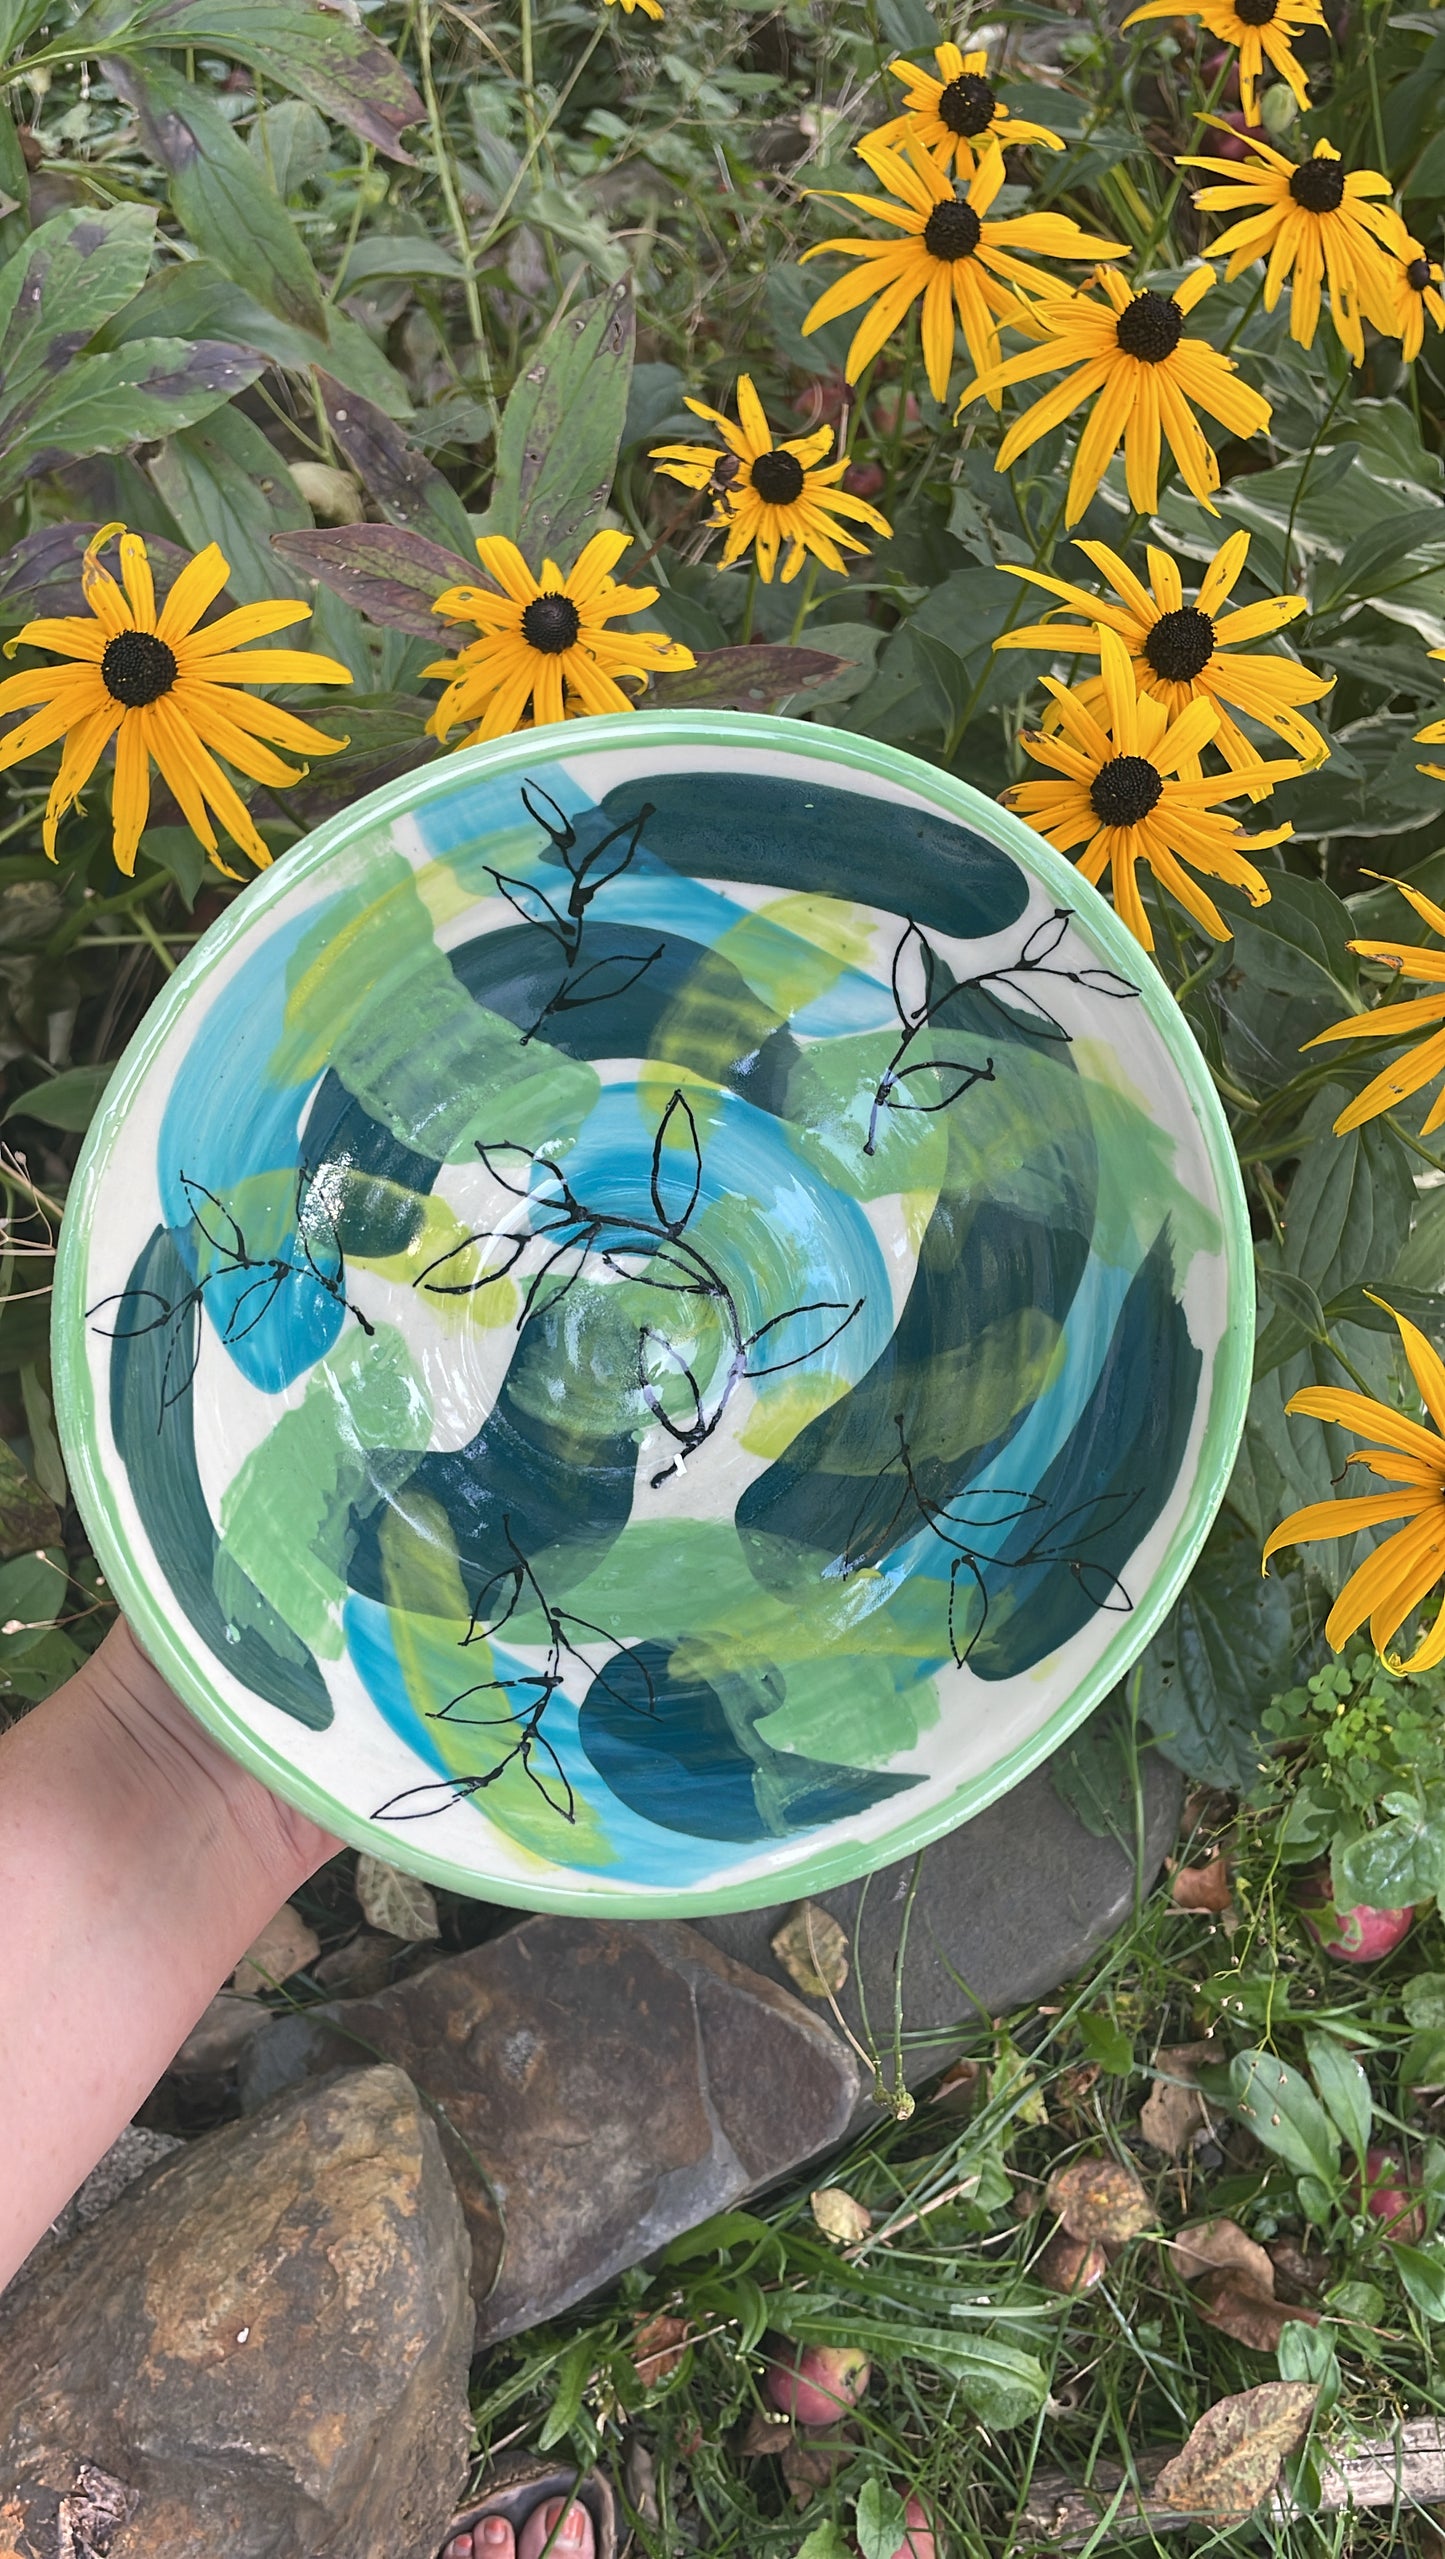 Paint Your Own Pottery Night! (January 13th)